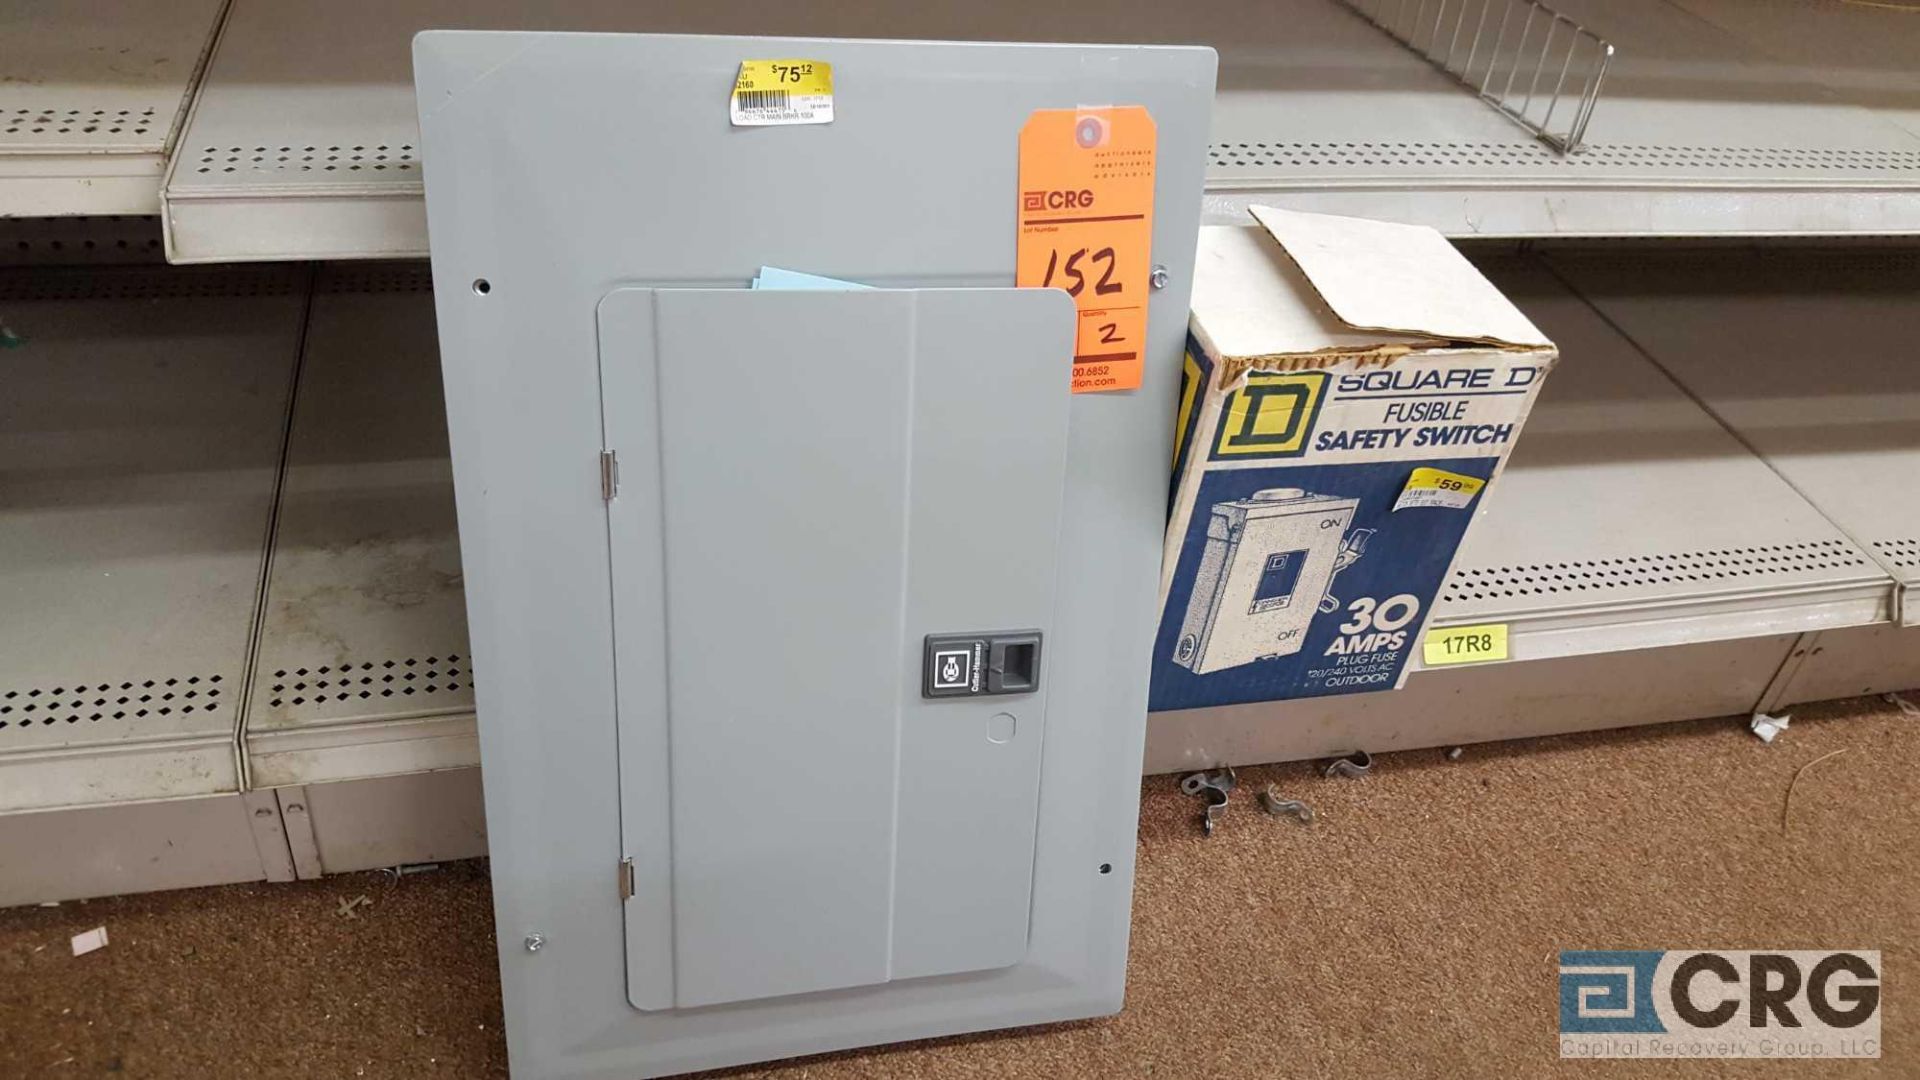 Lot of (2) assorted electric control boxes, (1) Cutler Hammer breaker box, NEW, and (1) Square D